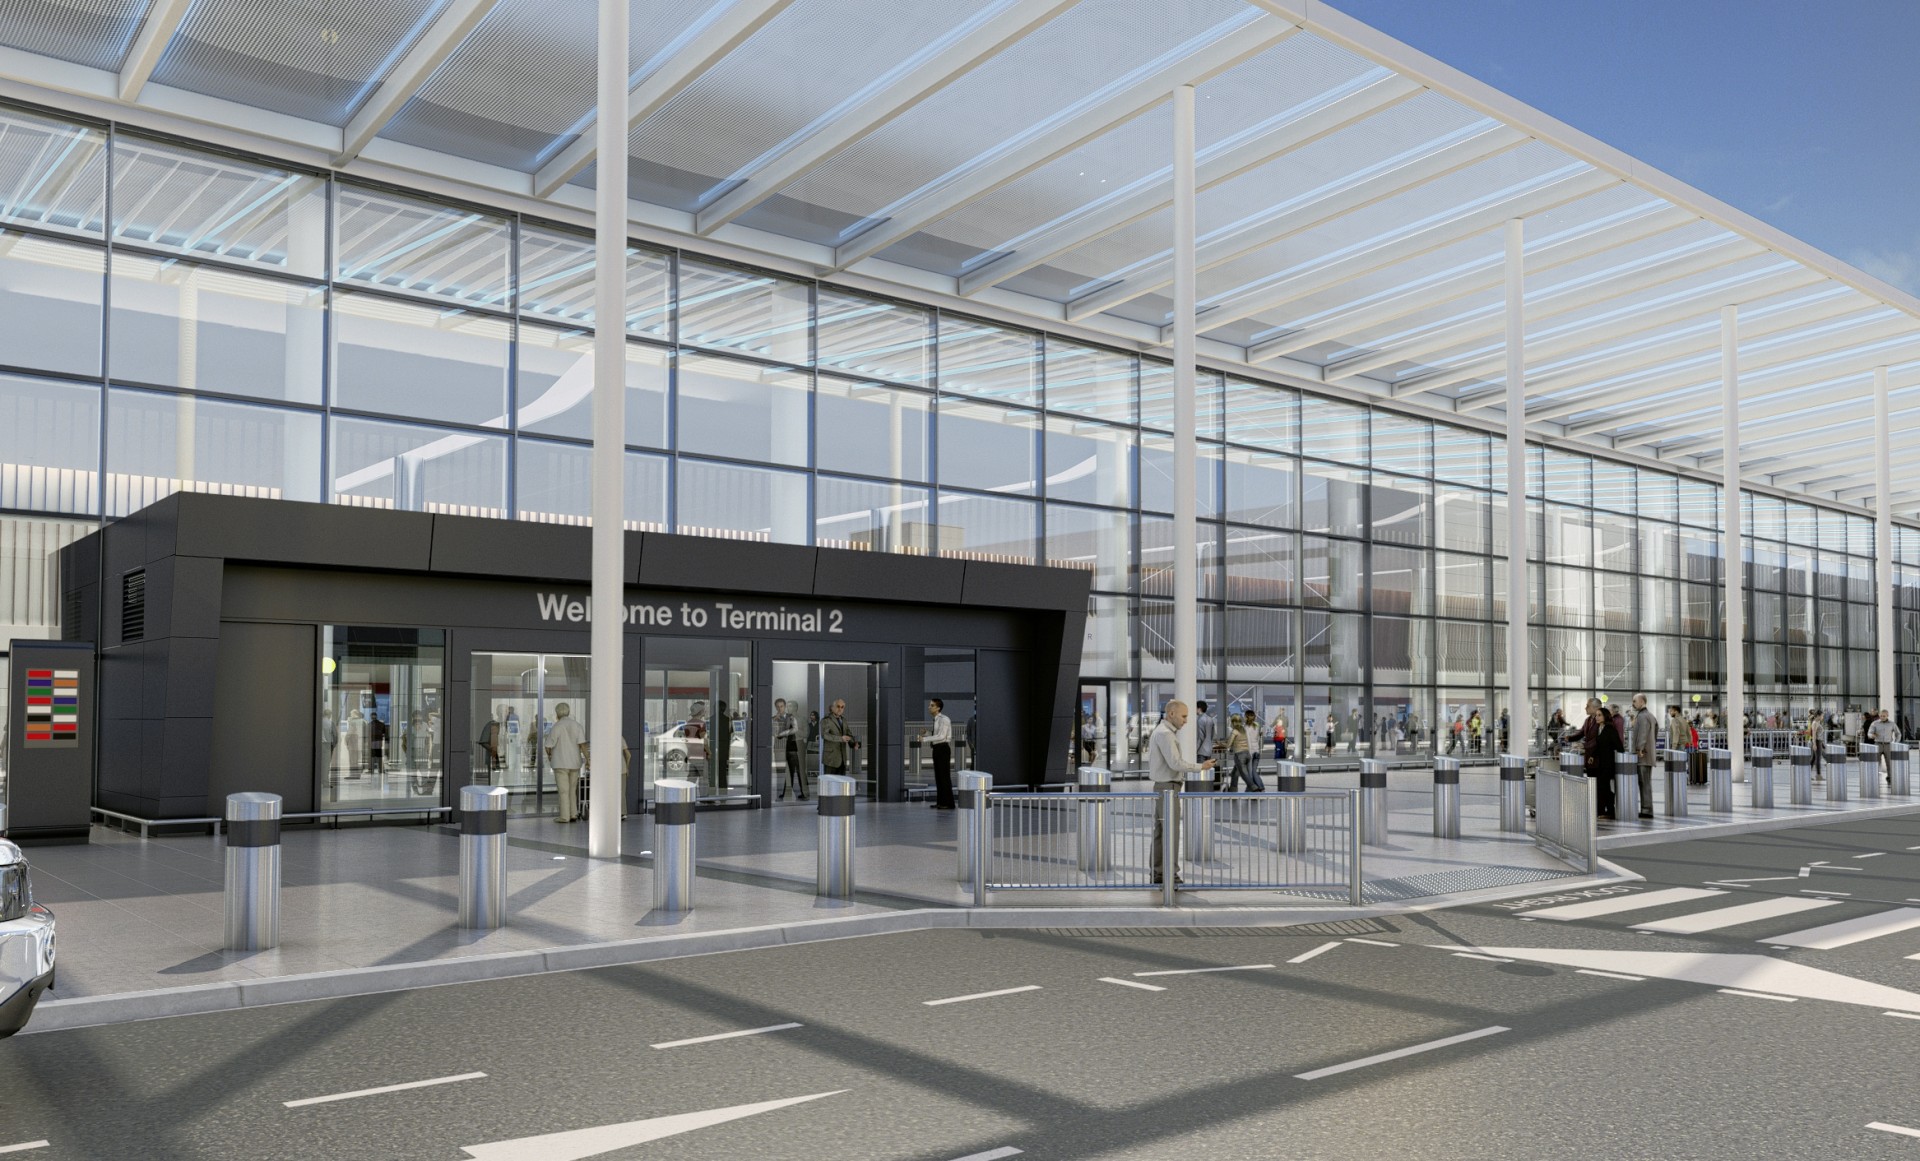 Take off for first phase of Manchester Airport's transformation